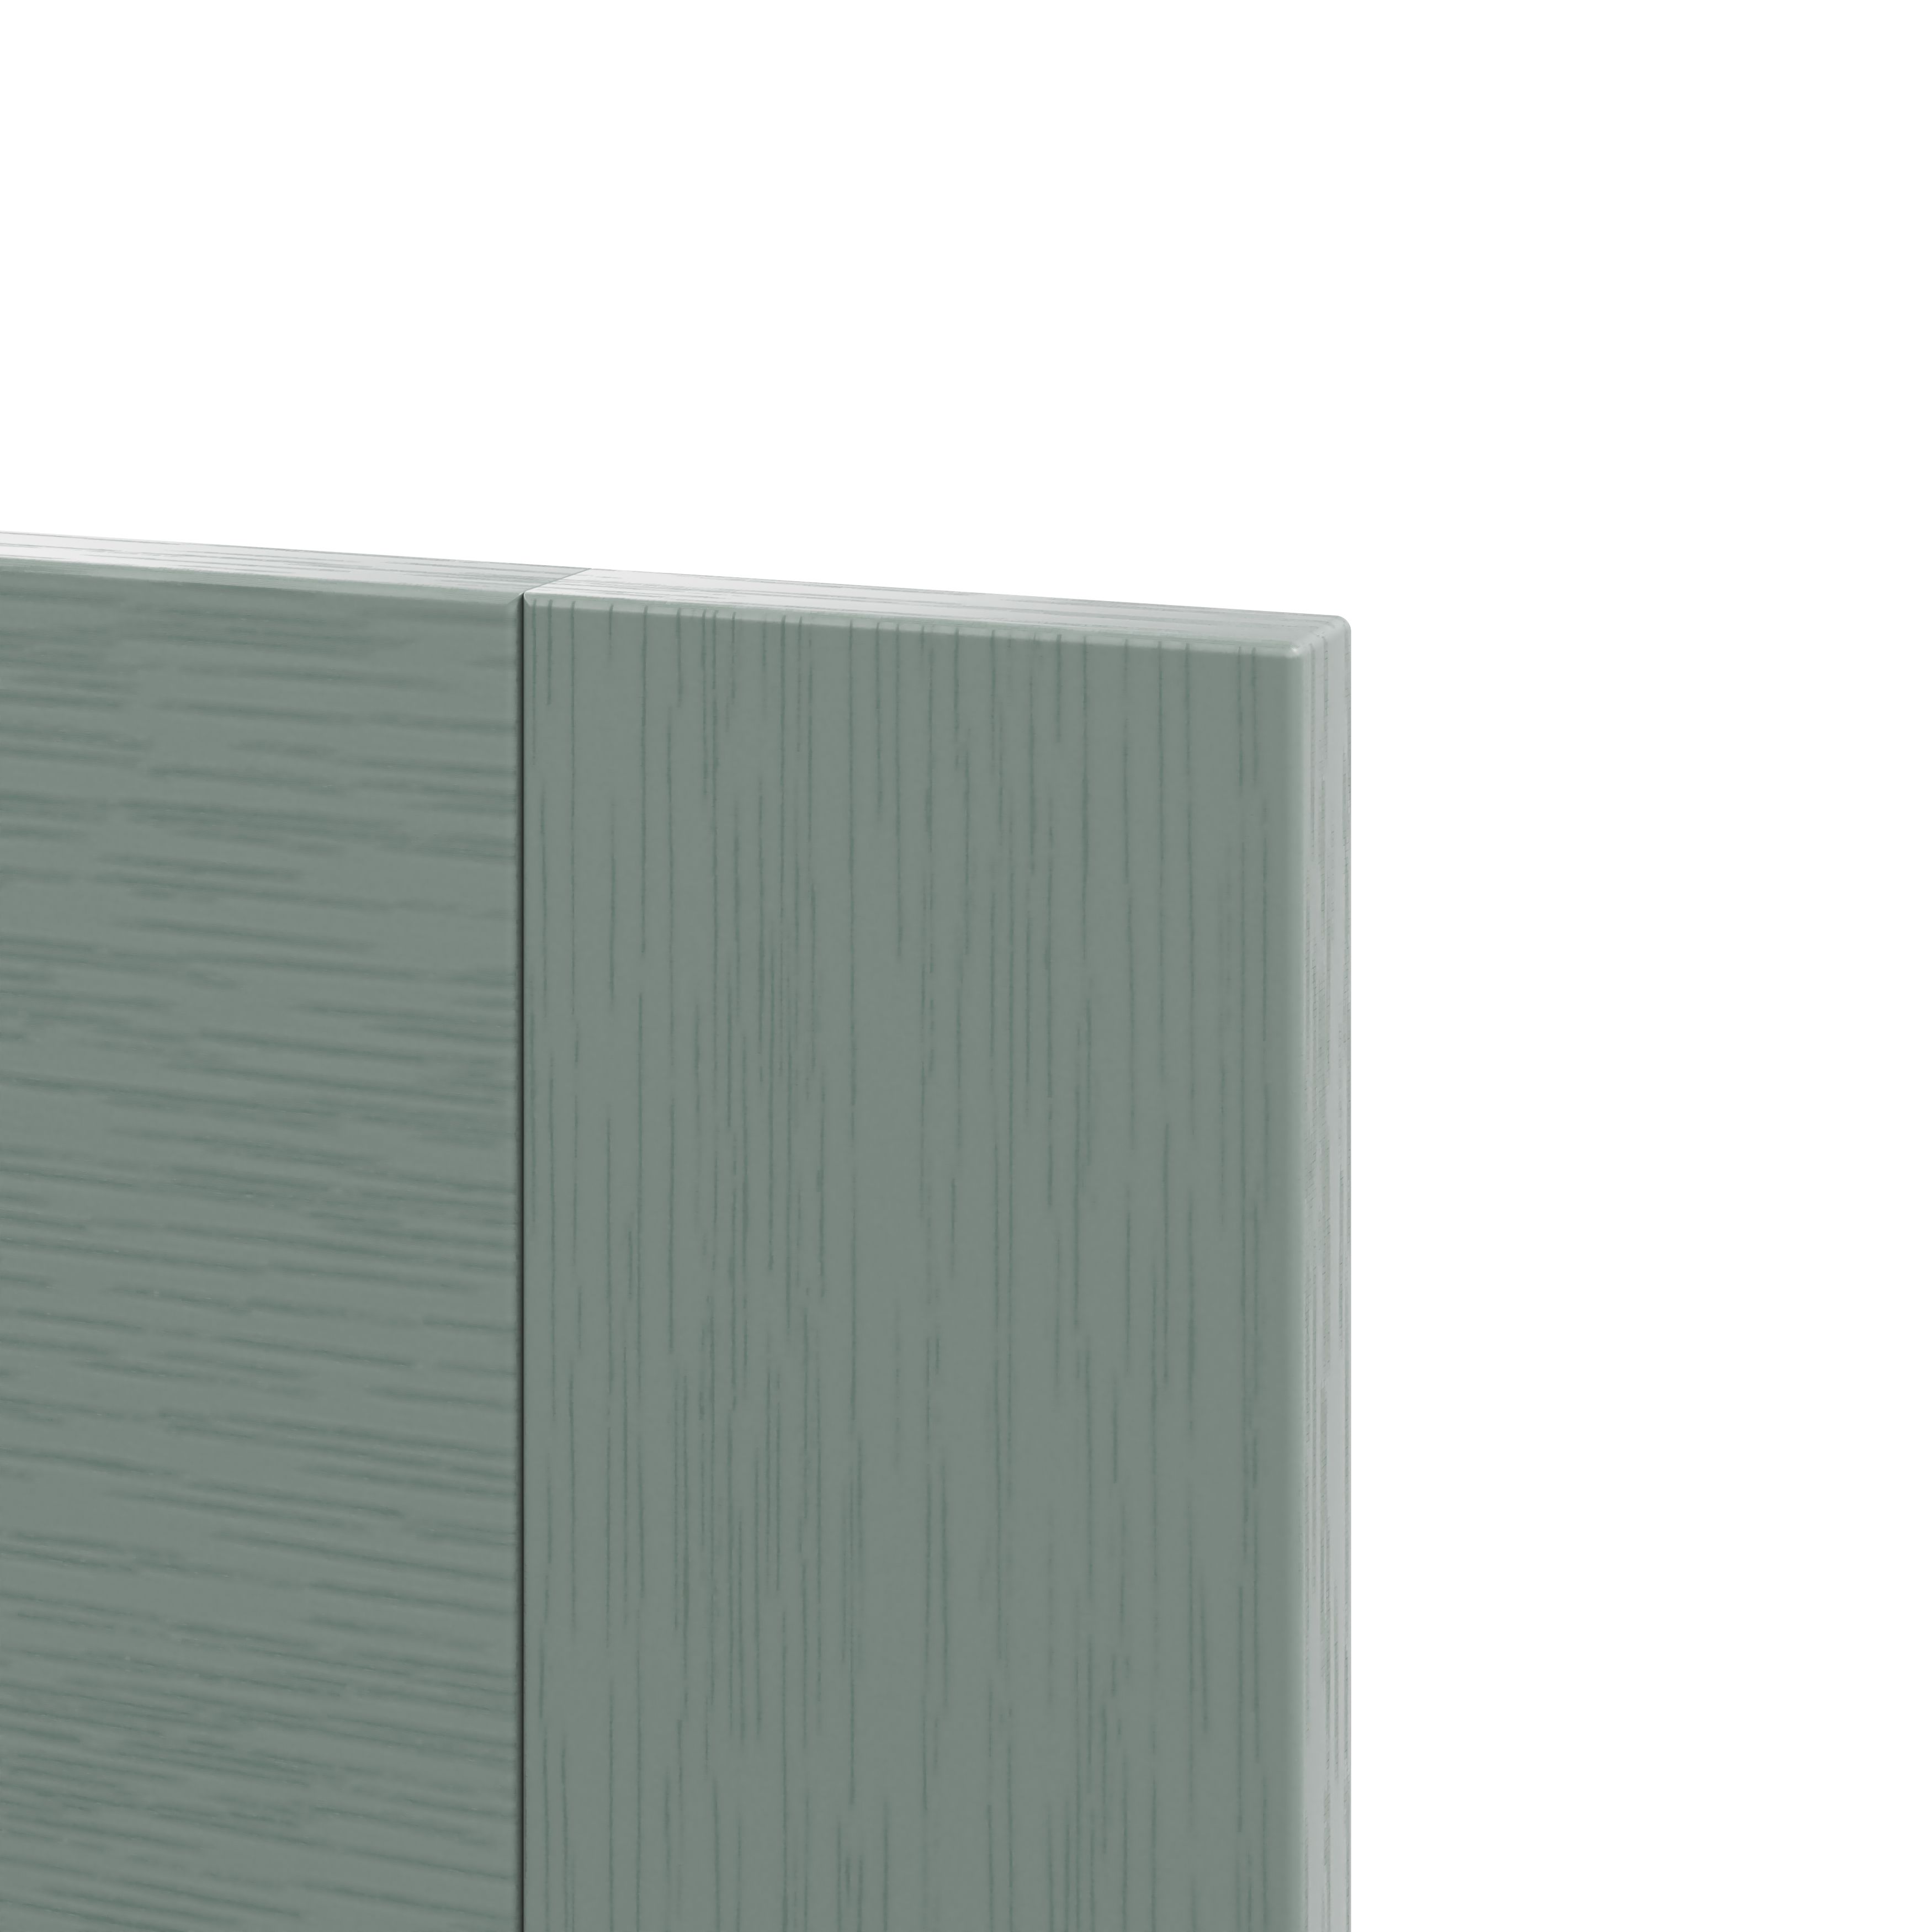 GoodHome Alpinia Matt Green Painted Wood Effect Shaker Drawer front (W)500mm, Pack of 4